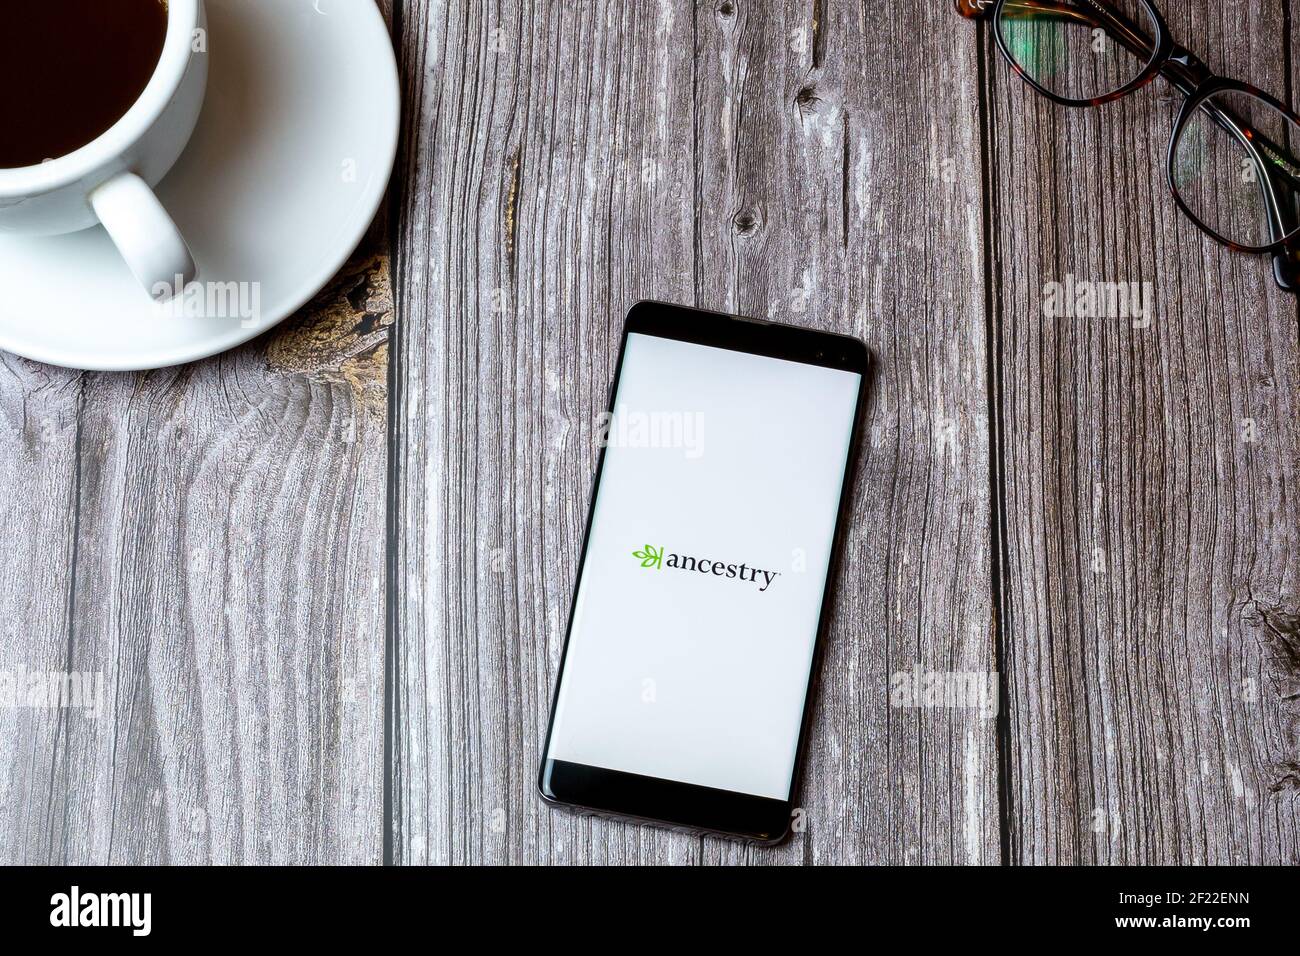 A mobile phone or cell phone laid on a wooden table with the Ancestry app open on screen next to a coffee Stock Photo